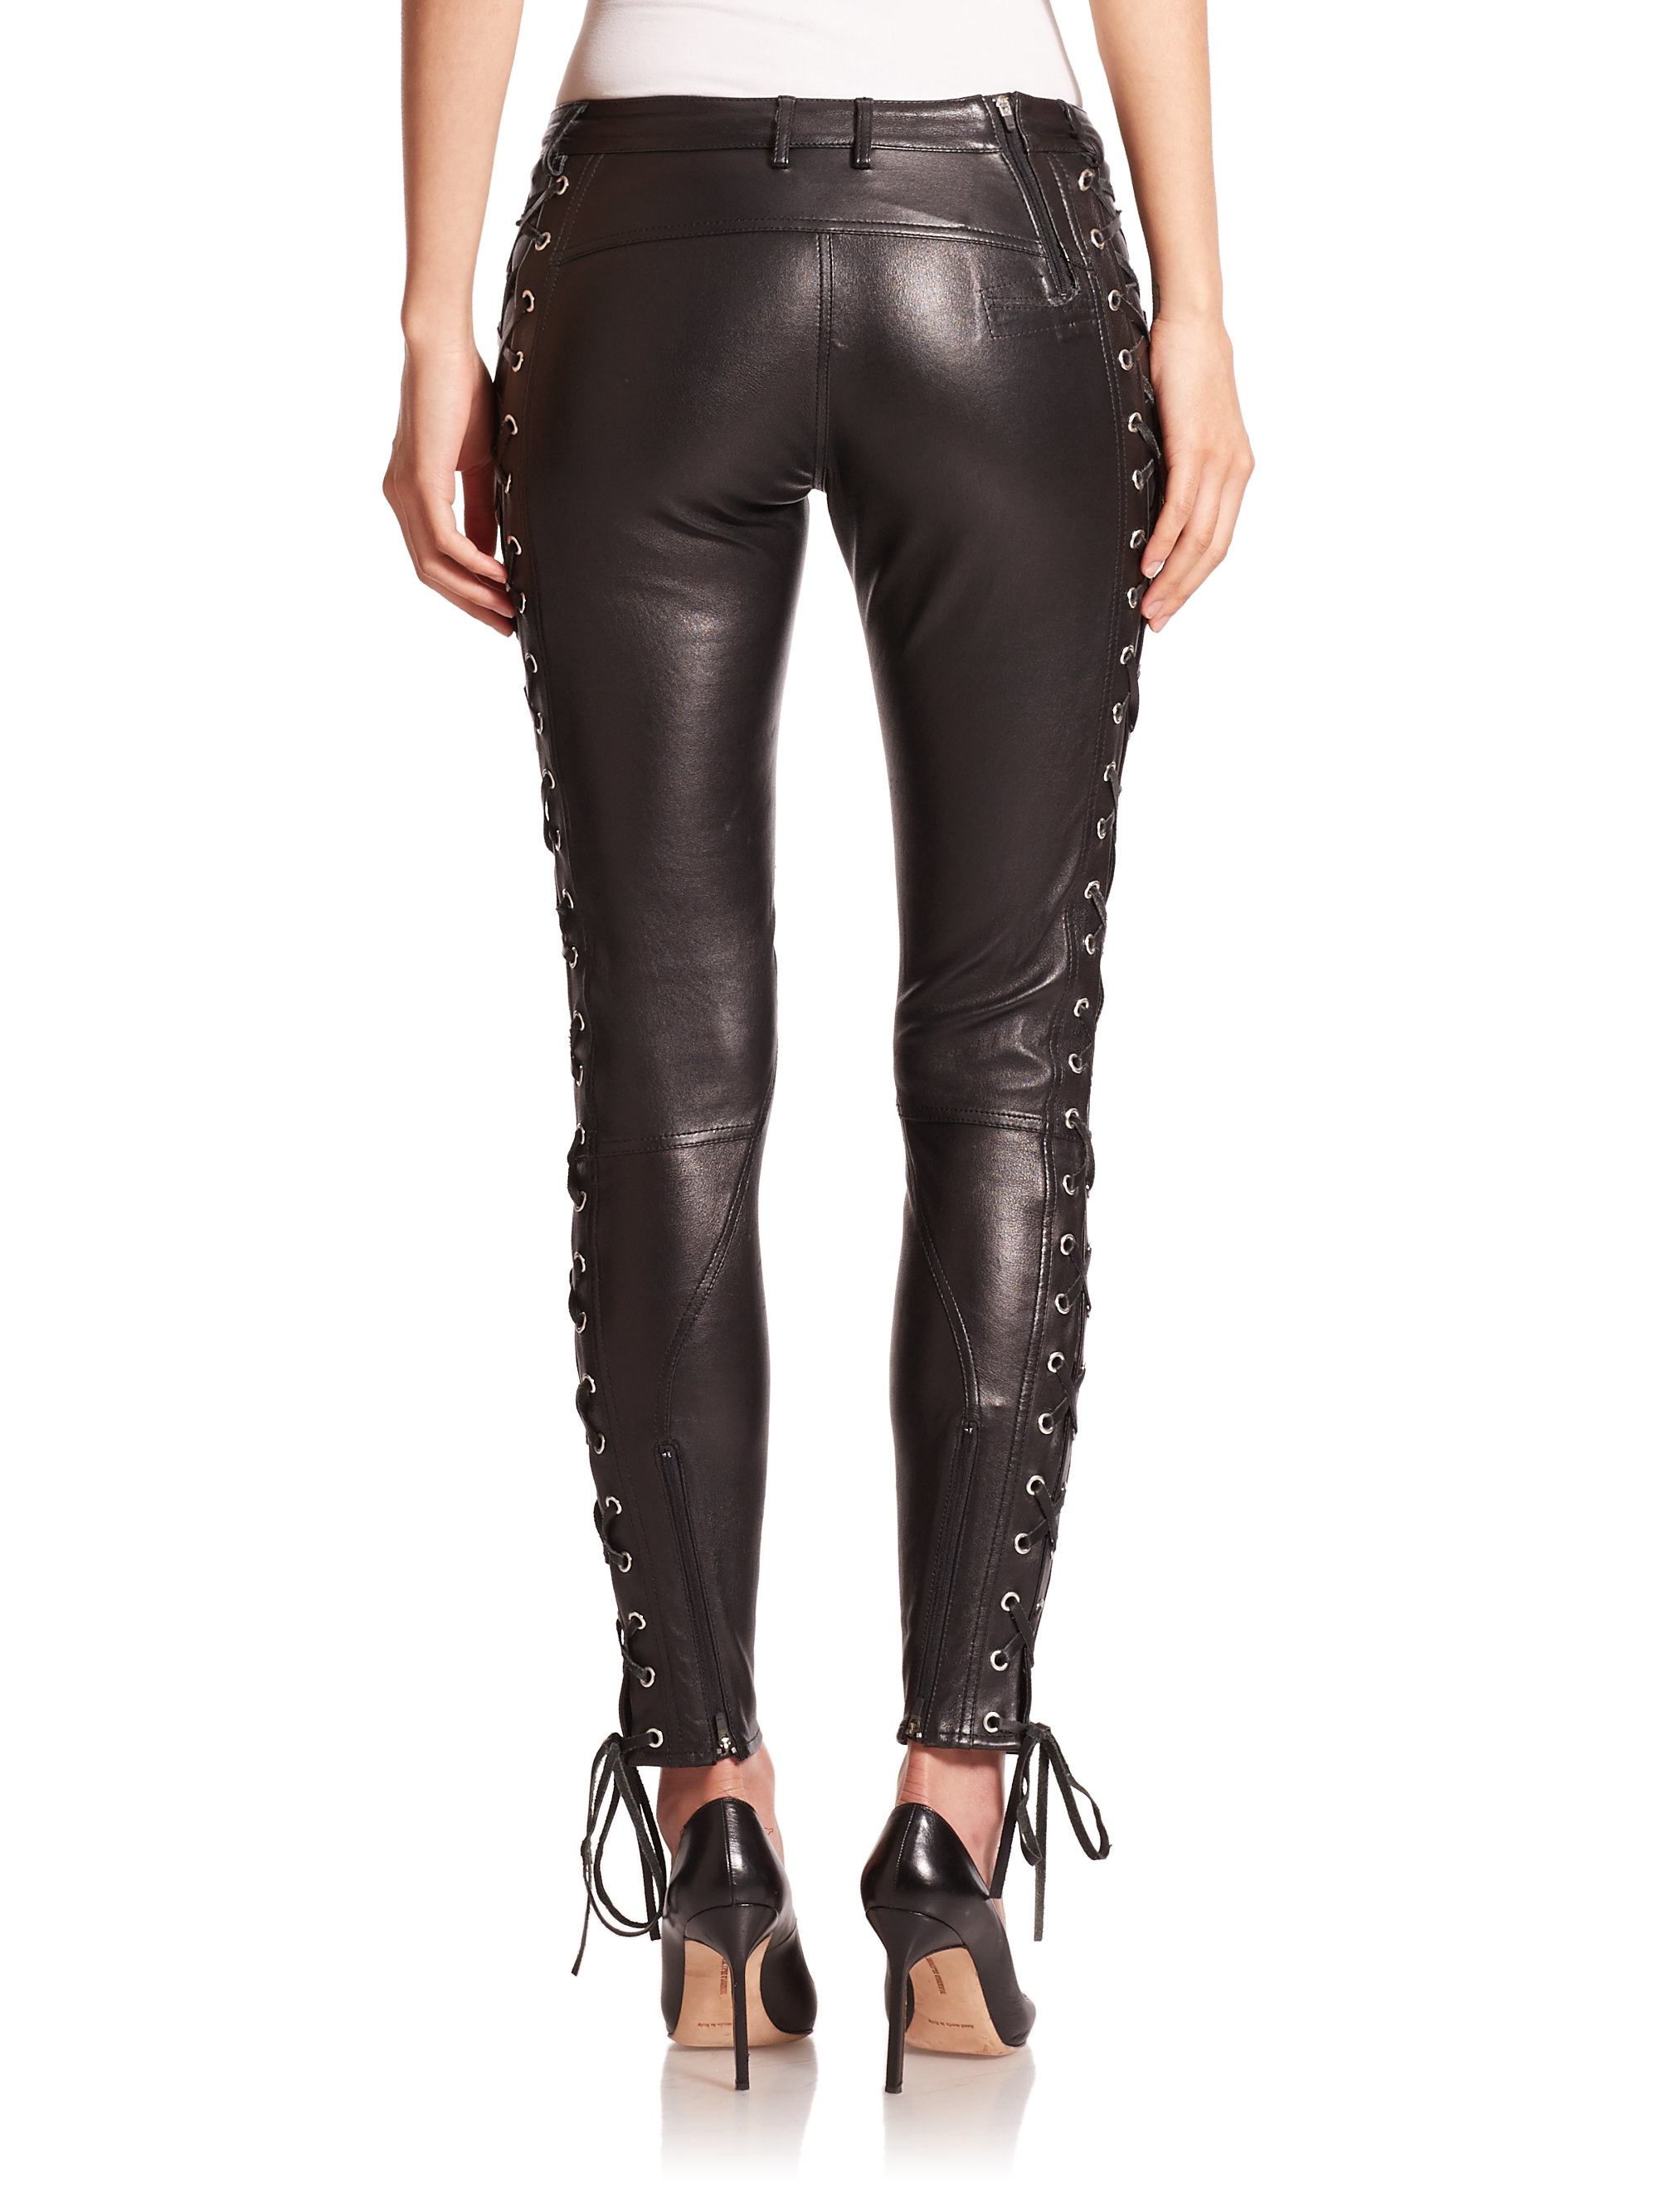 Lyst - Faith Connexion Leather Lace-up Leggings in Black